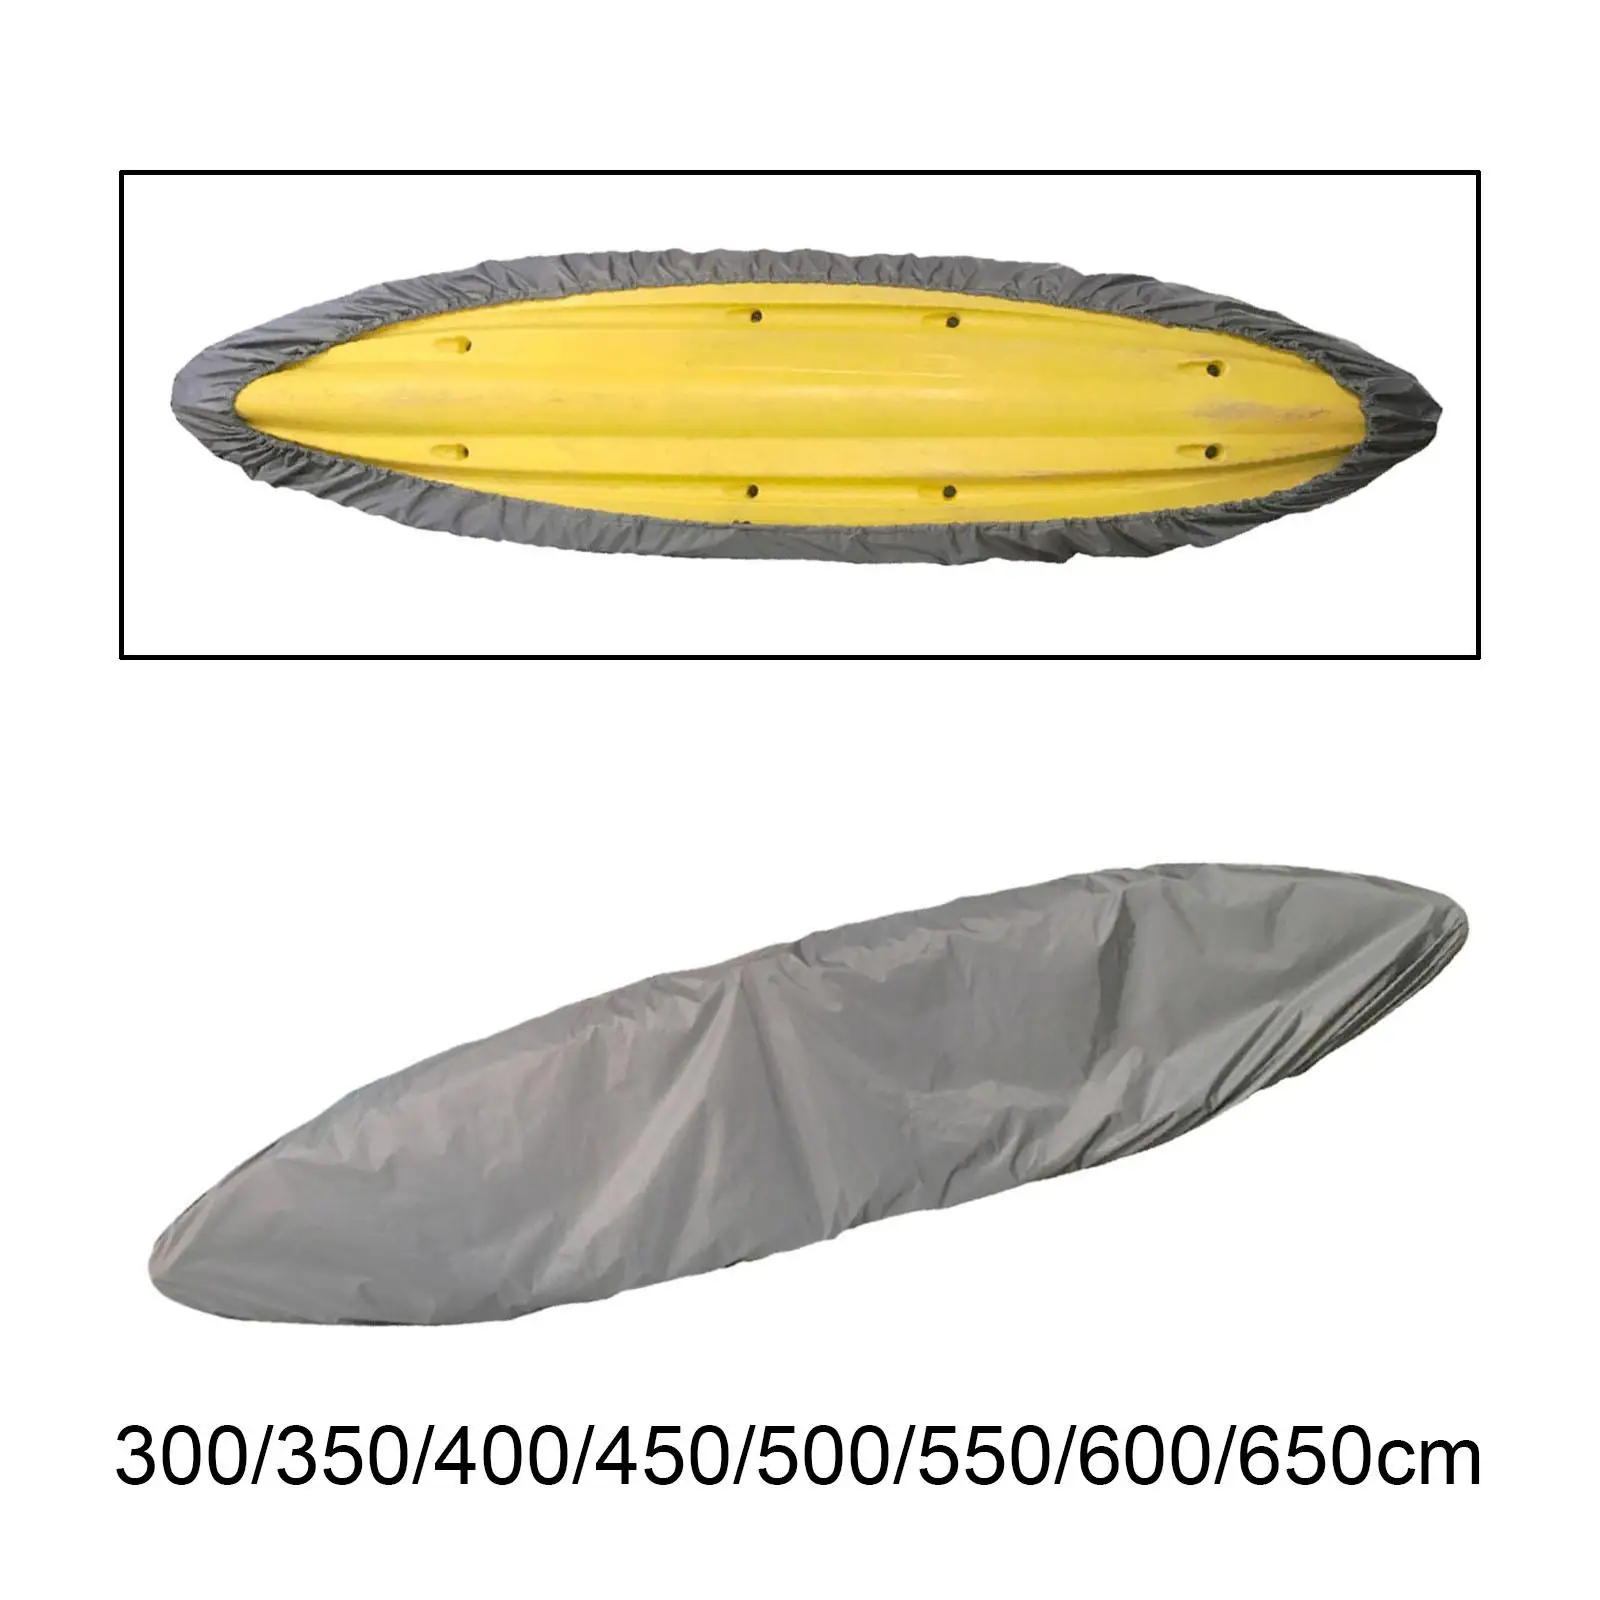 Kayak Cover, Boat Storage Dust Cover, Waterproof Dustproof Canoe Cover, Paddle Boards Cover